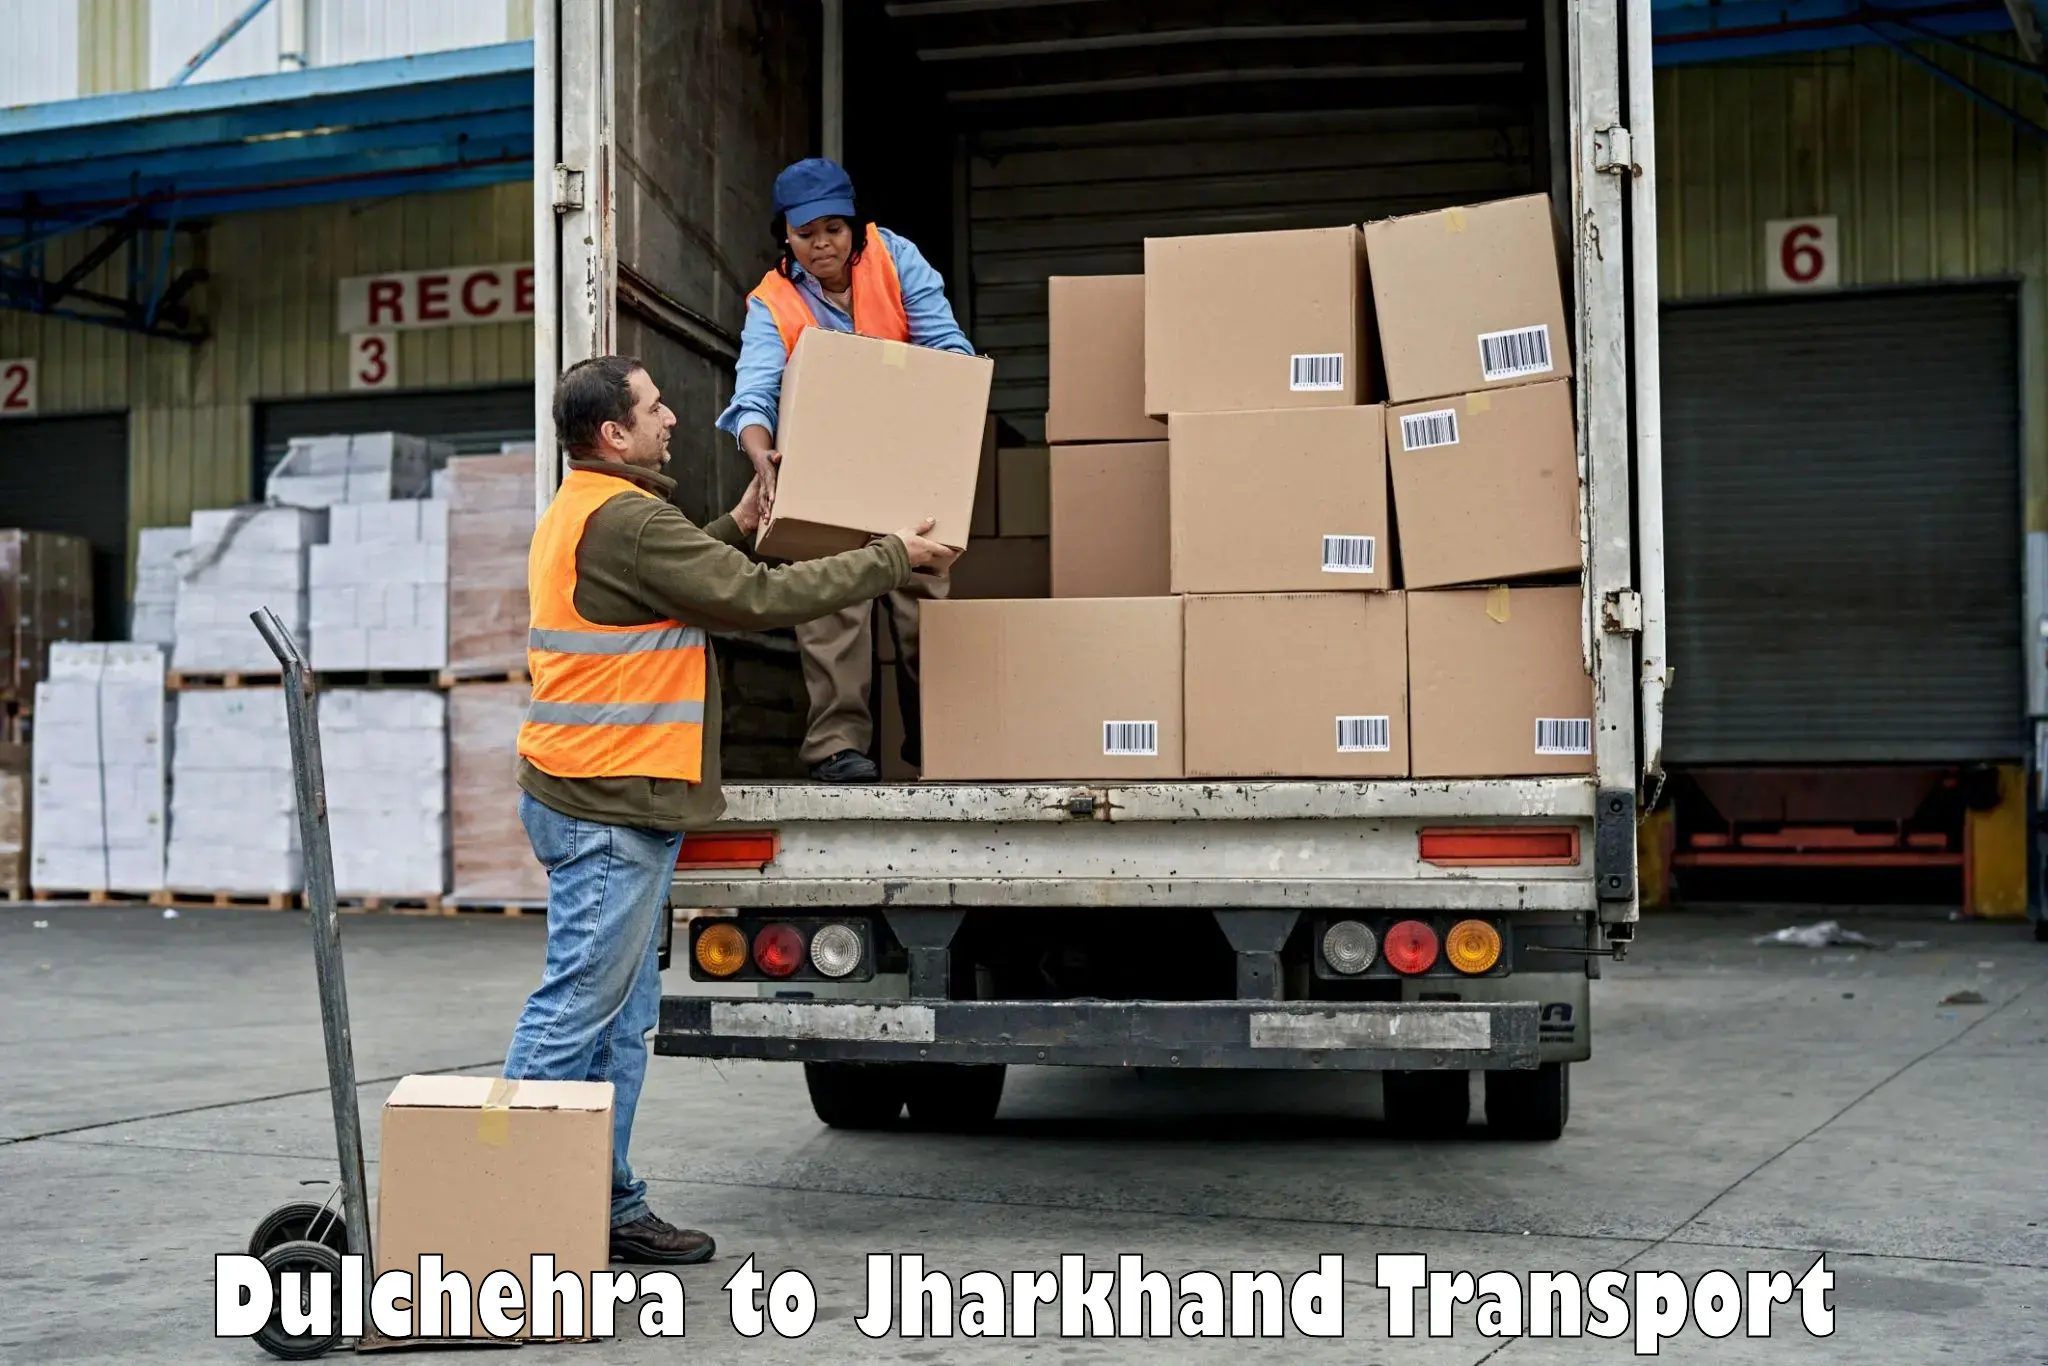 Vehicle transport services in Dulchehra to Koderma